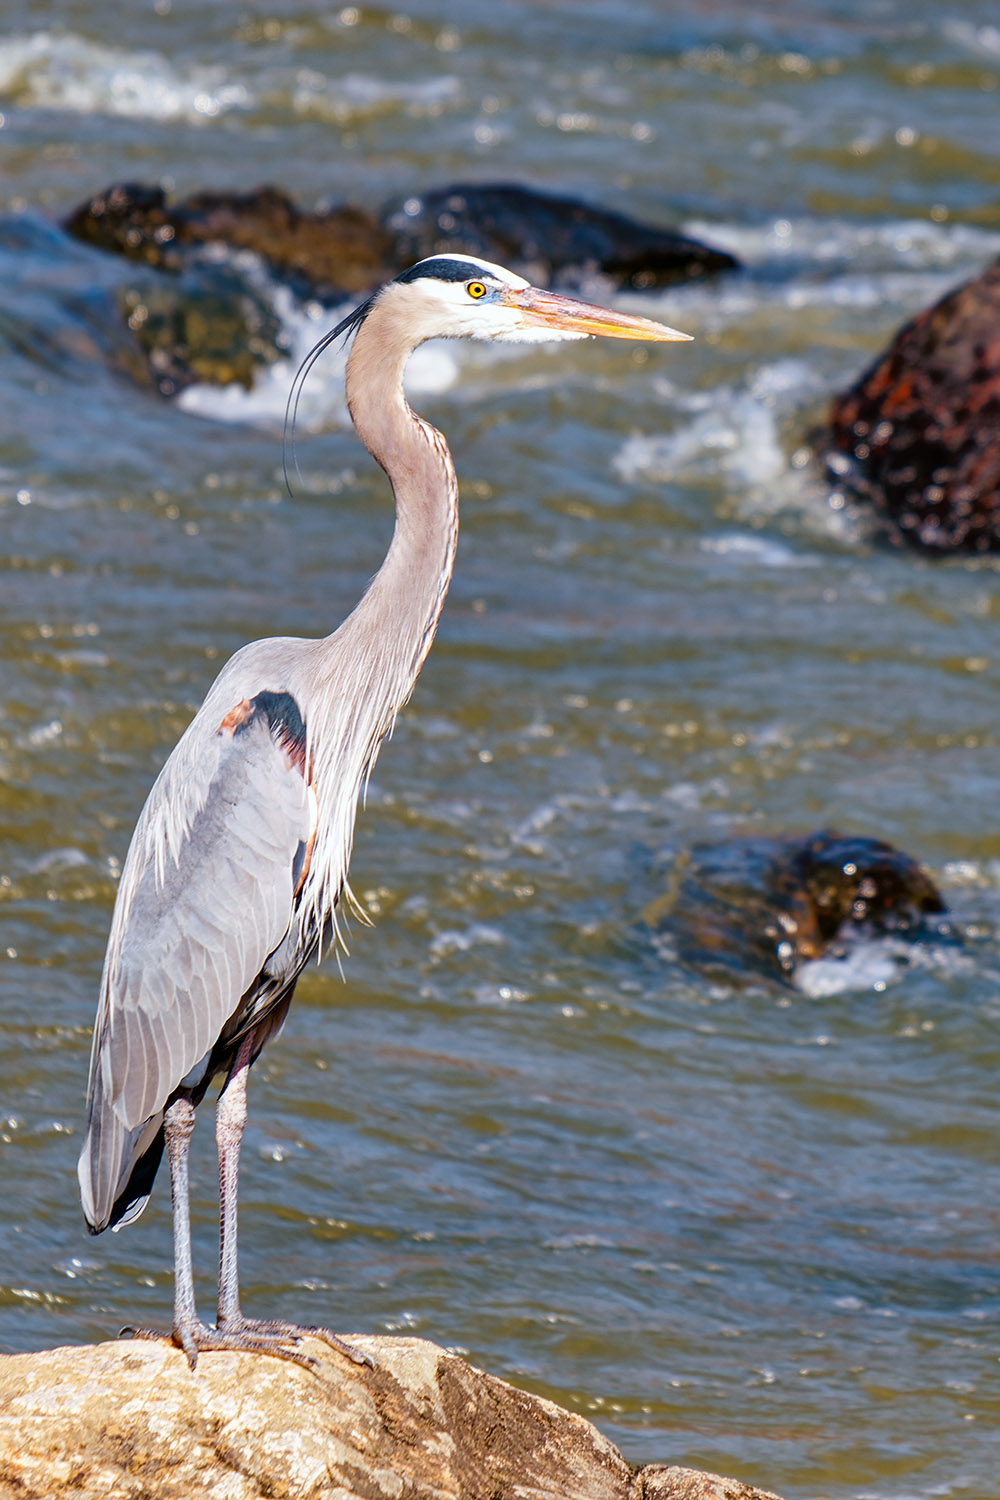 A Great Blue Heron surveying the river